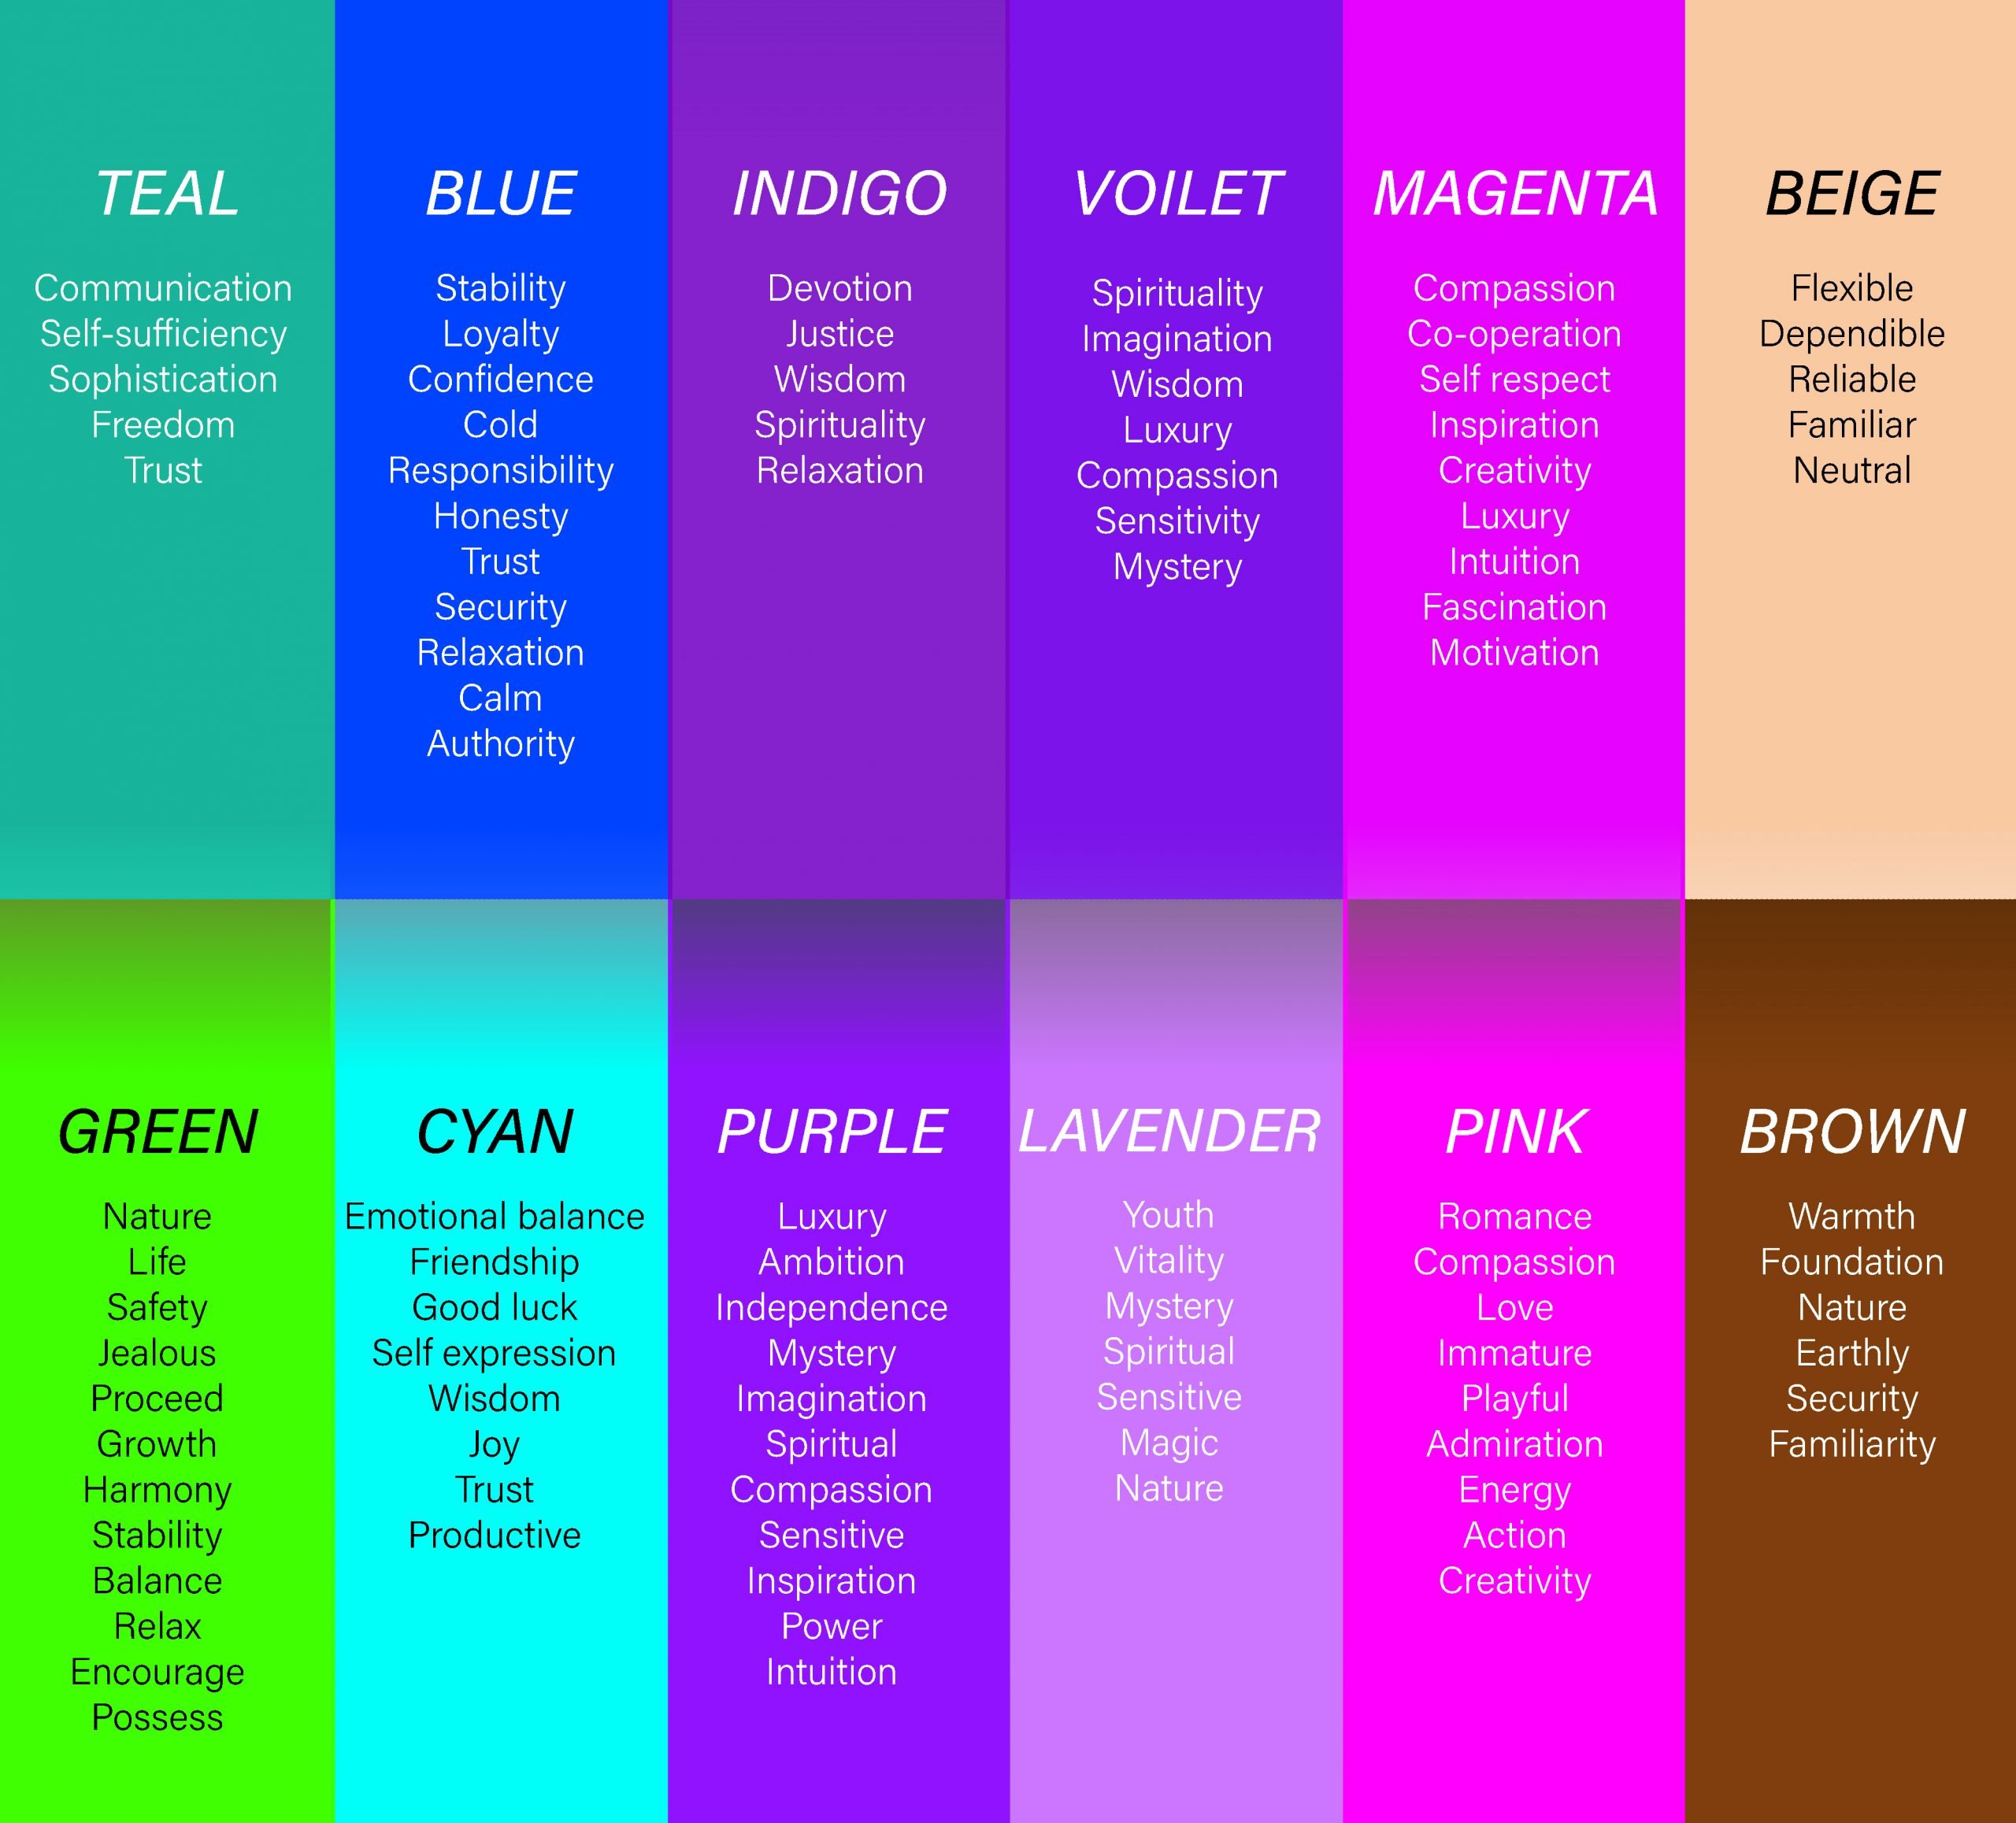 A graphic of "color psychology", indicating traits and characteristics which are commonly associated with certain colors in the green, blue, purple and brown range.